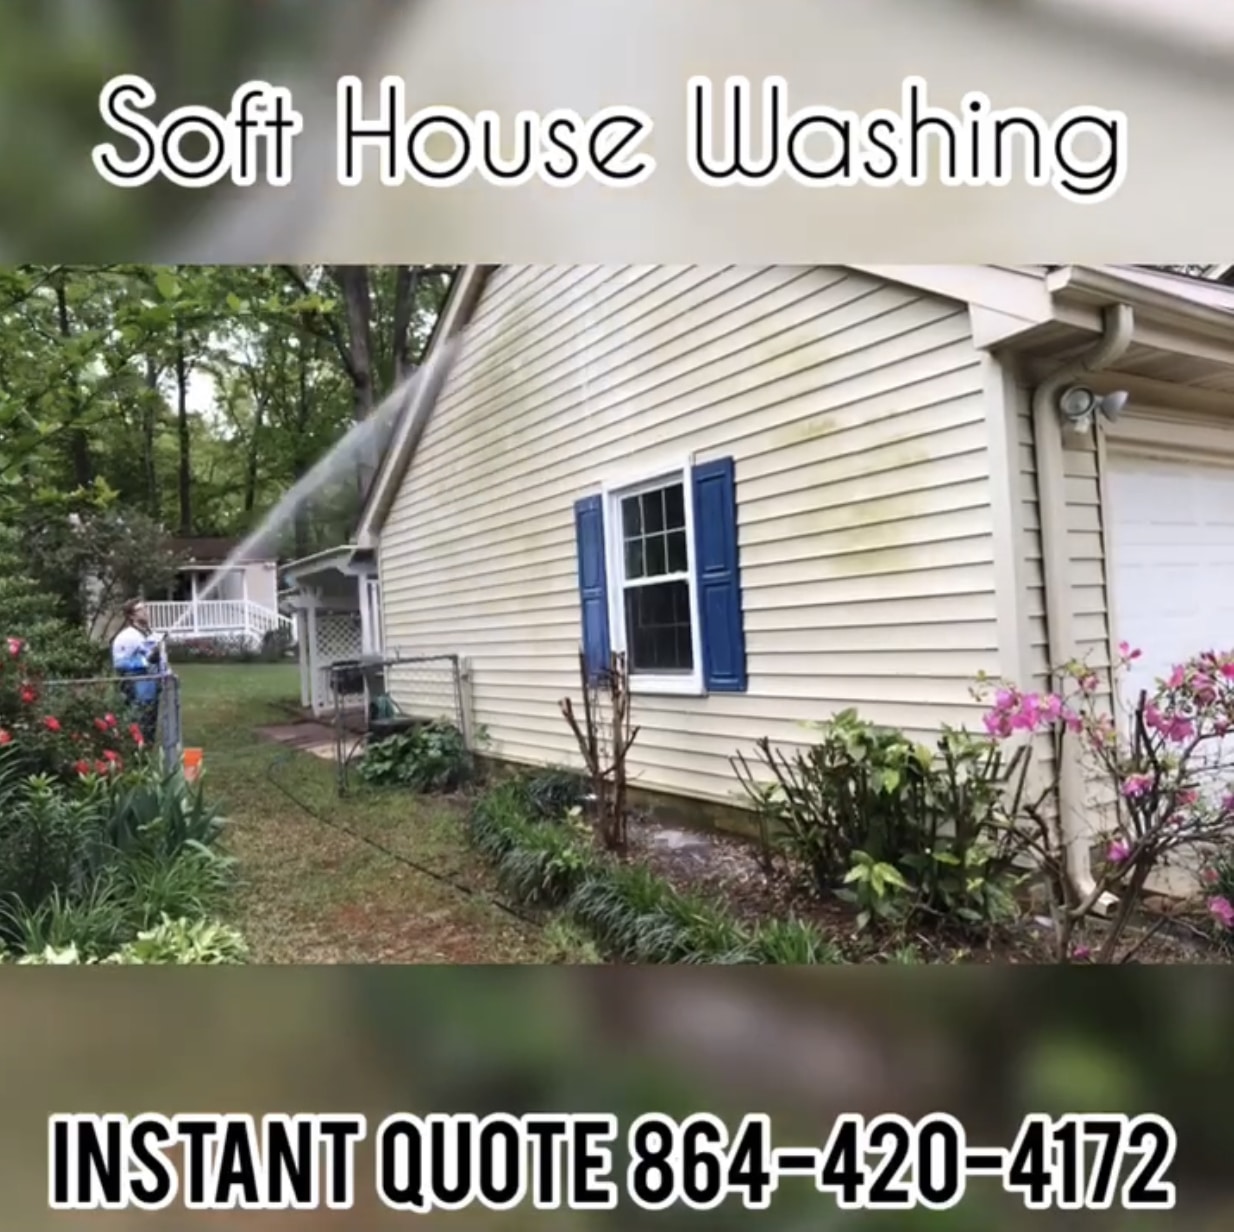 Soft house washing quote